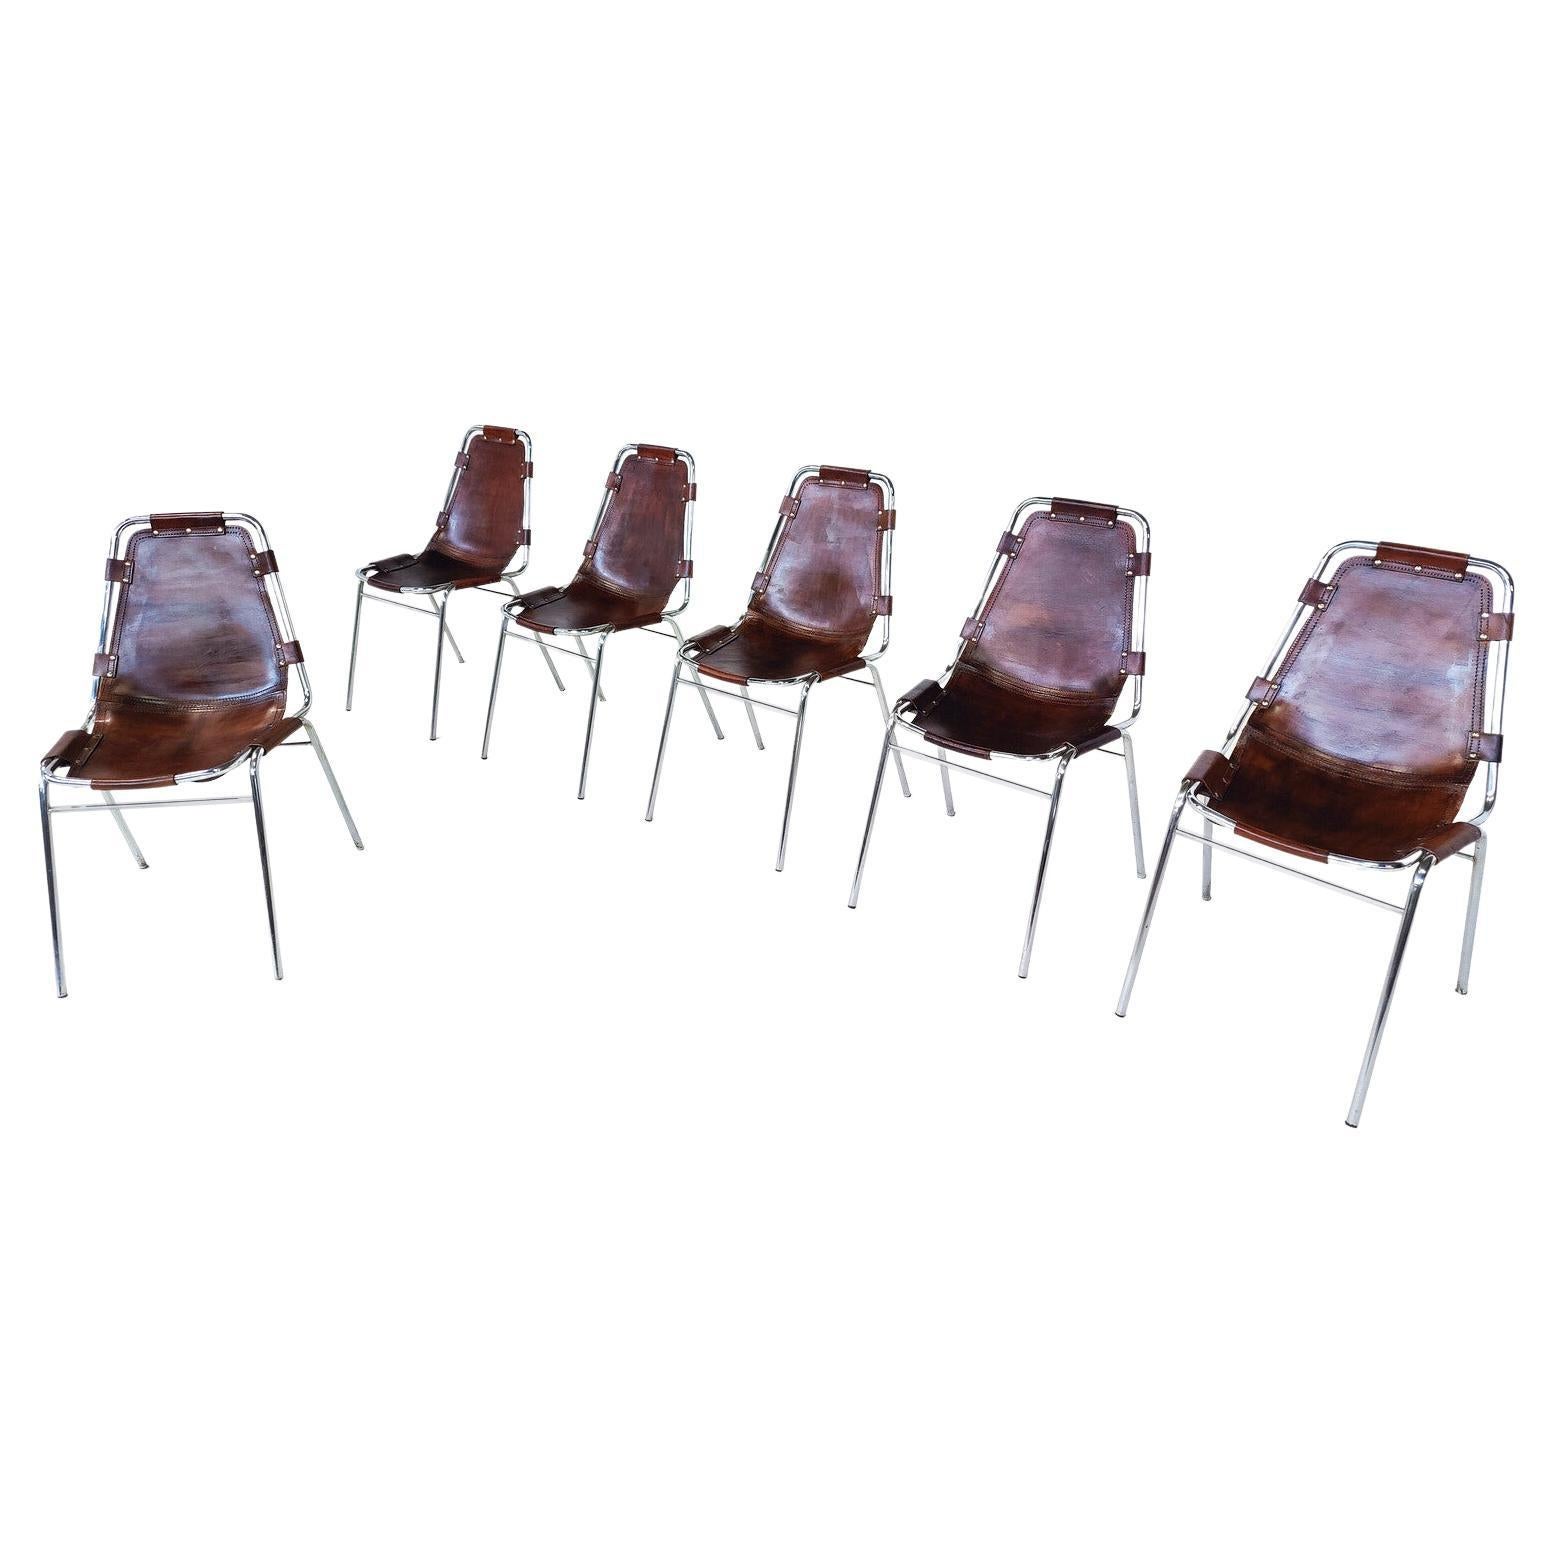 Midcentury Set of 6 Leather Les Arcs Chairs, Dalvera, Selected by Perriand